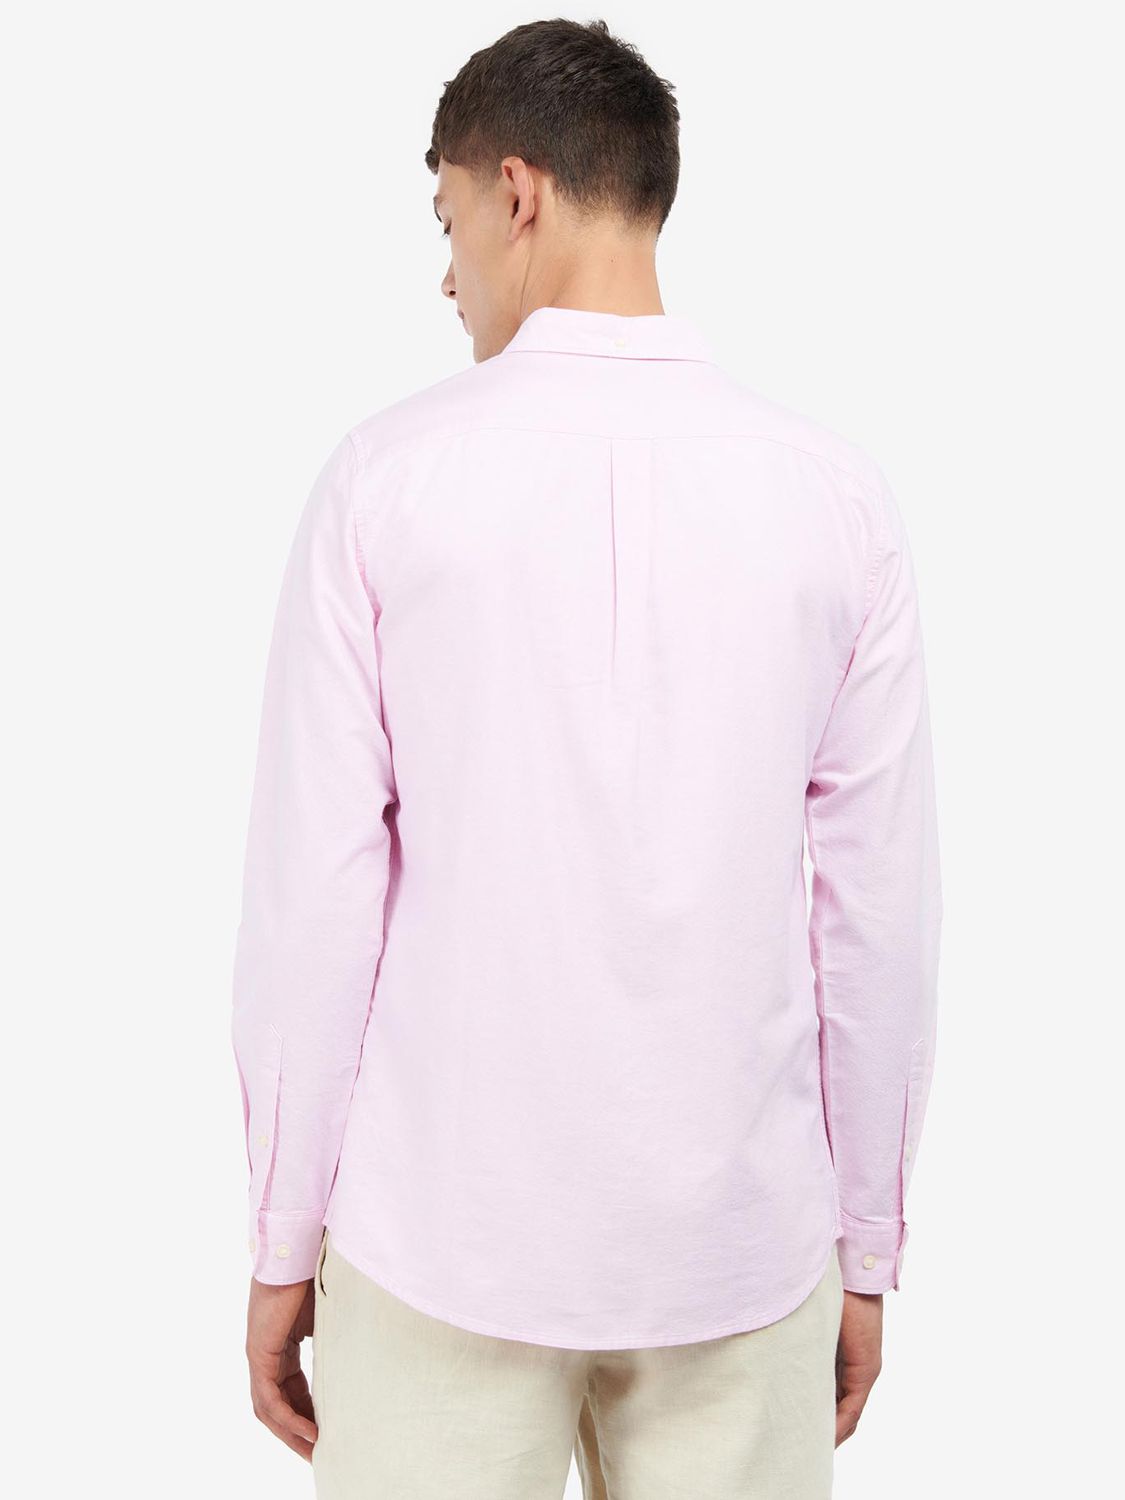 Barbour Tailored Fit Oxford Shirt, Pink at John Lewis & Partners